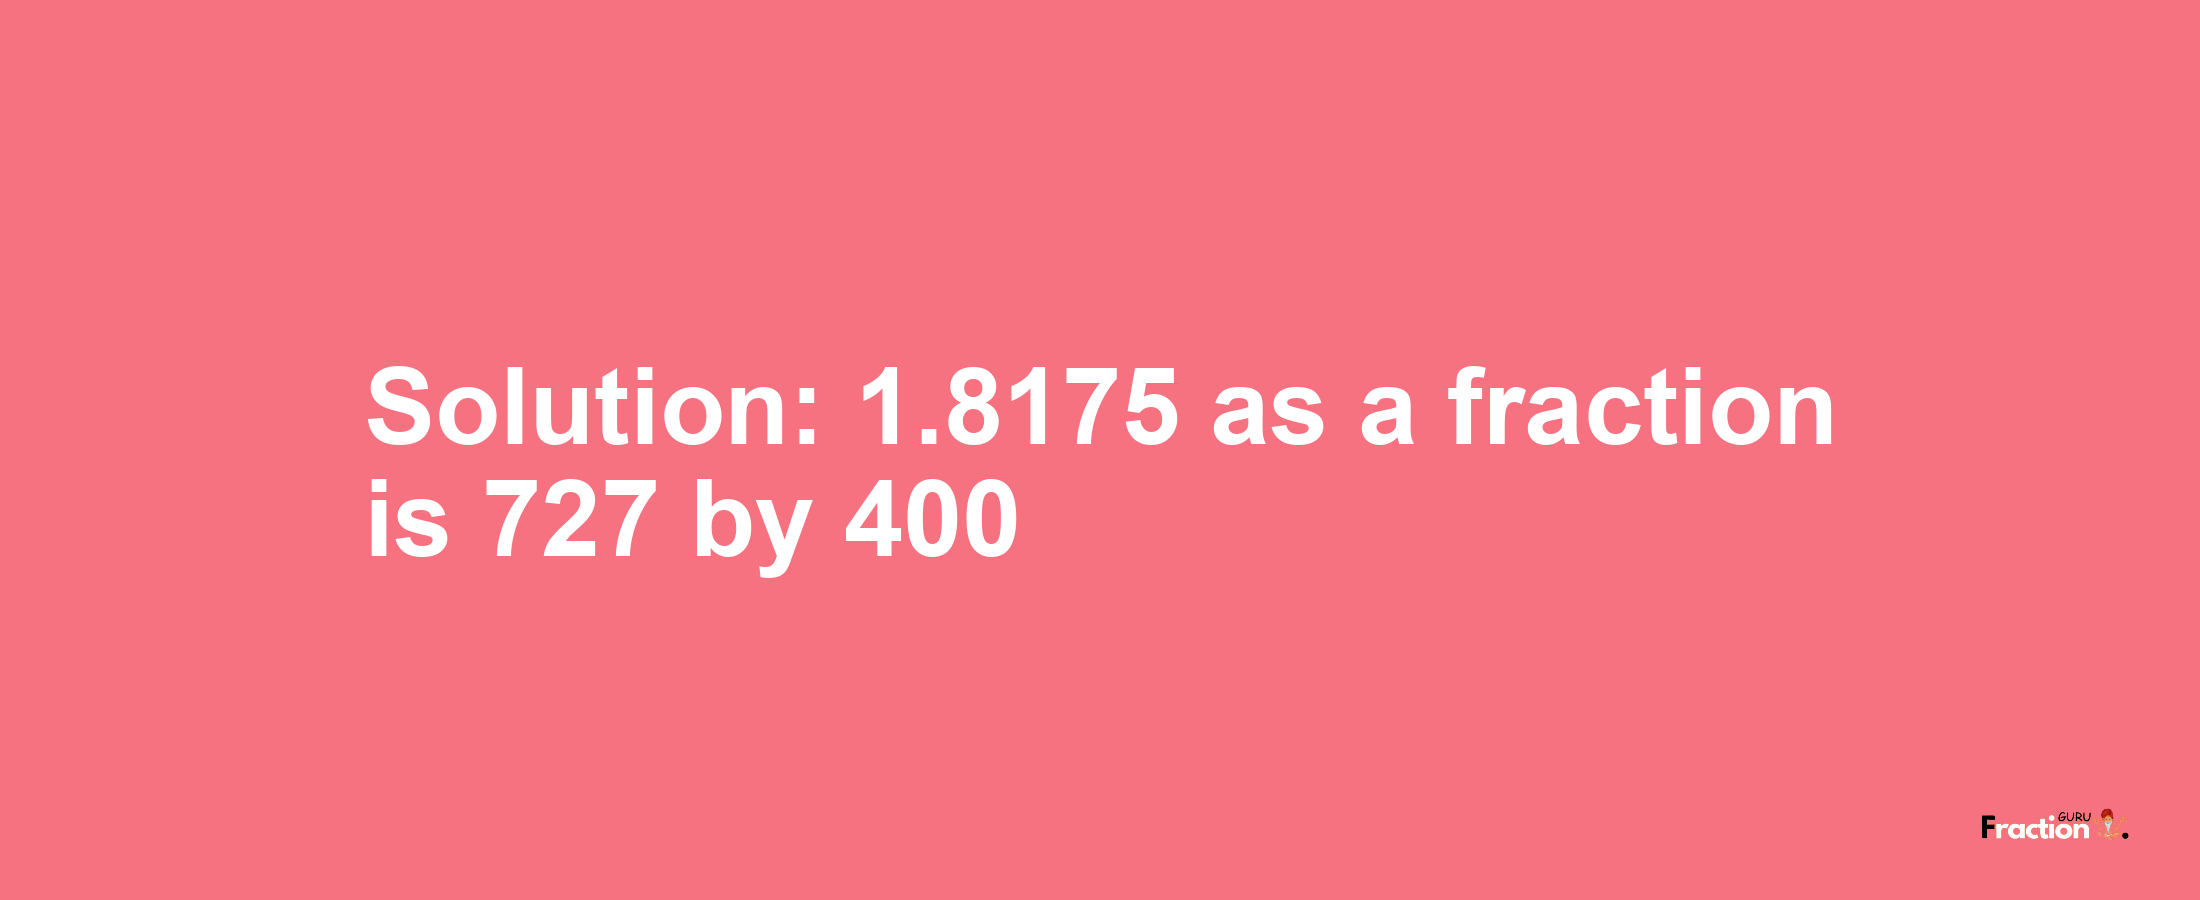 Solution:1.8175 as a fraction is 727/400